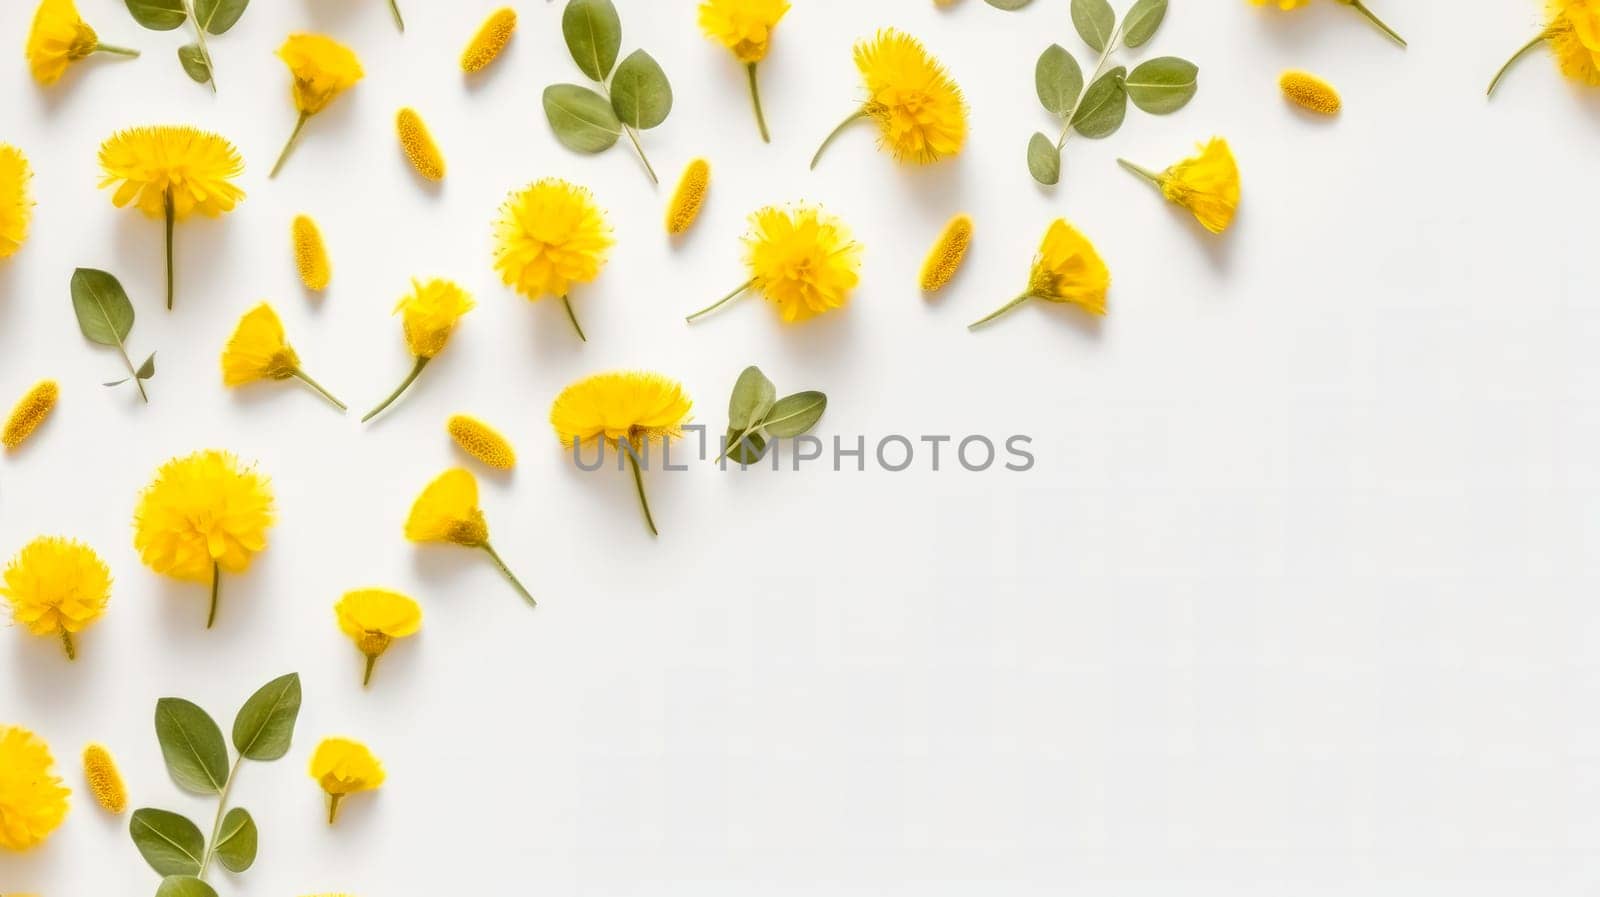 yellow crocus flowers on a clean white background by Alla_Morozova93